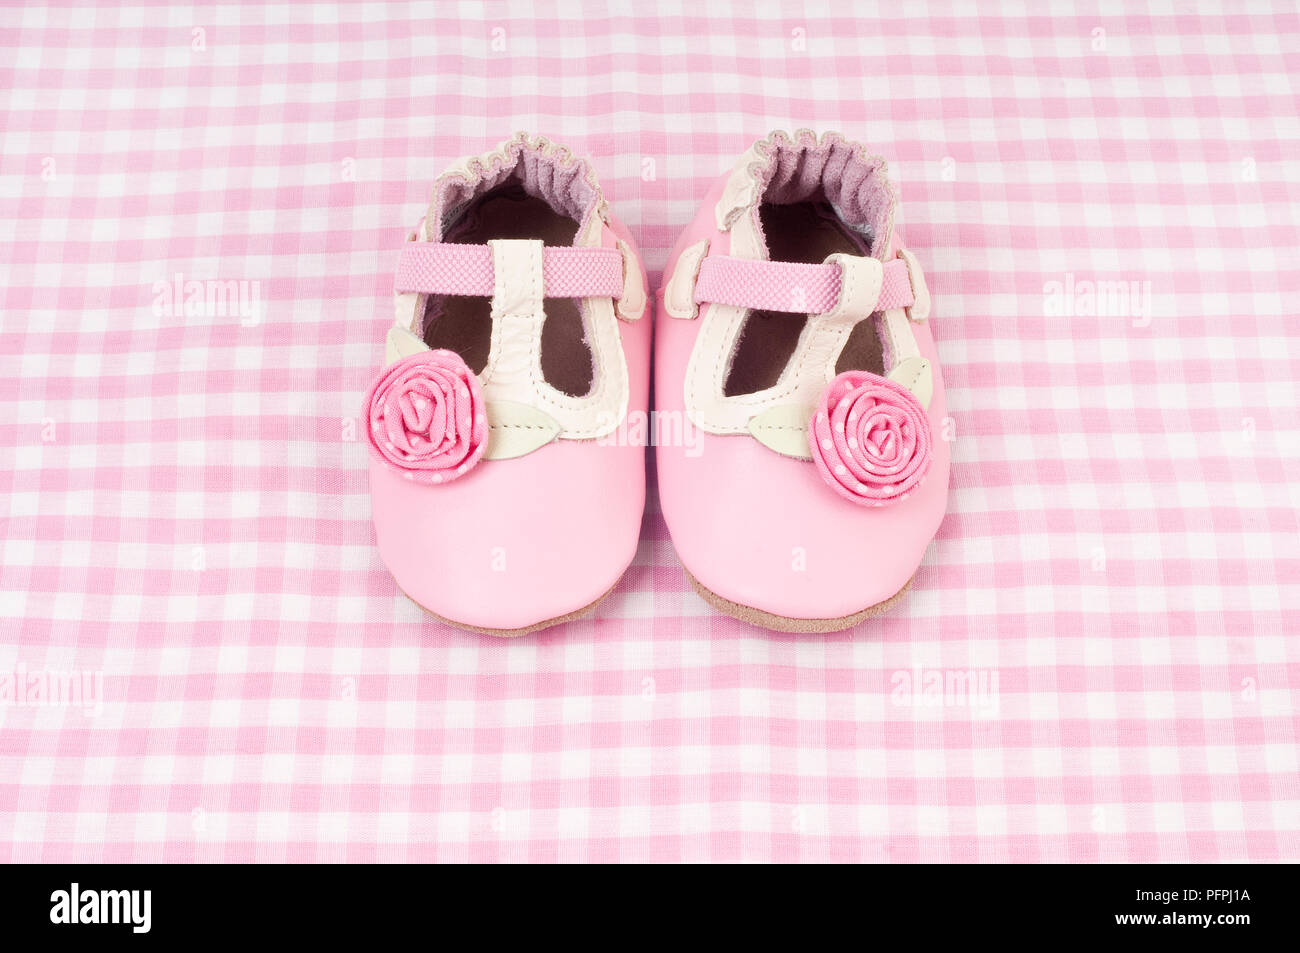 Pair of soft pink and white baby's shoes decorated with pink roses on pink and white checked background Stock Photo